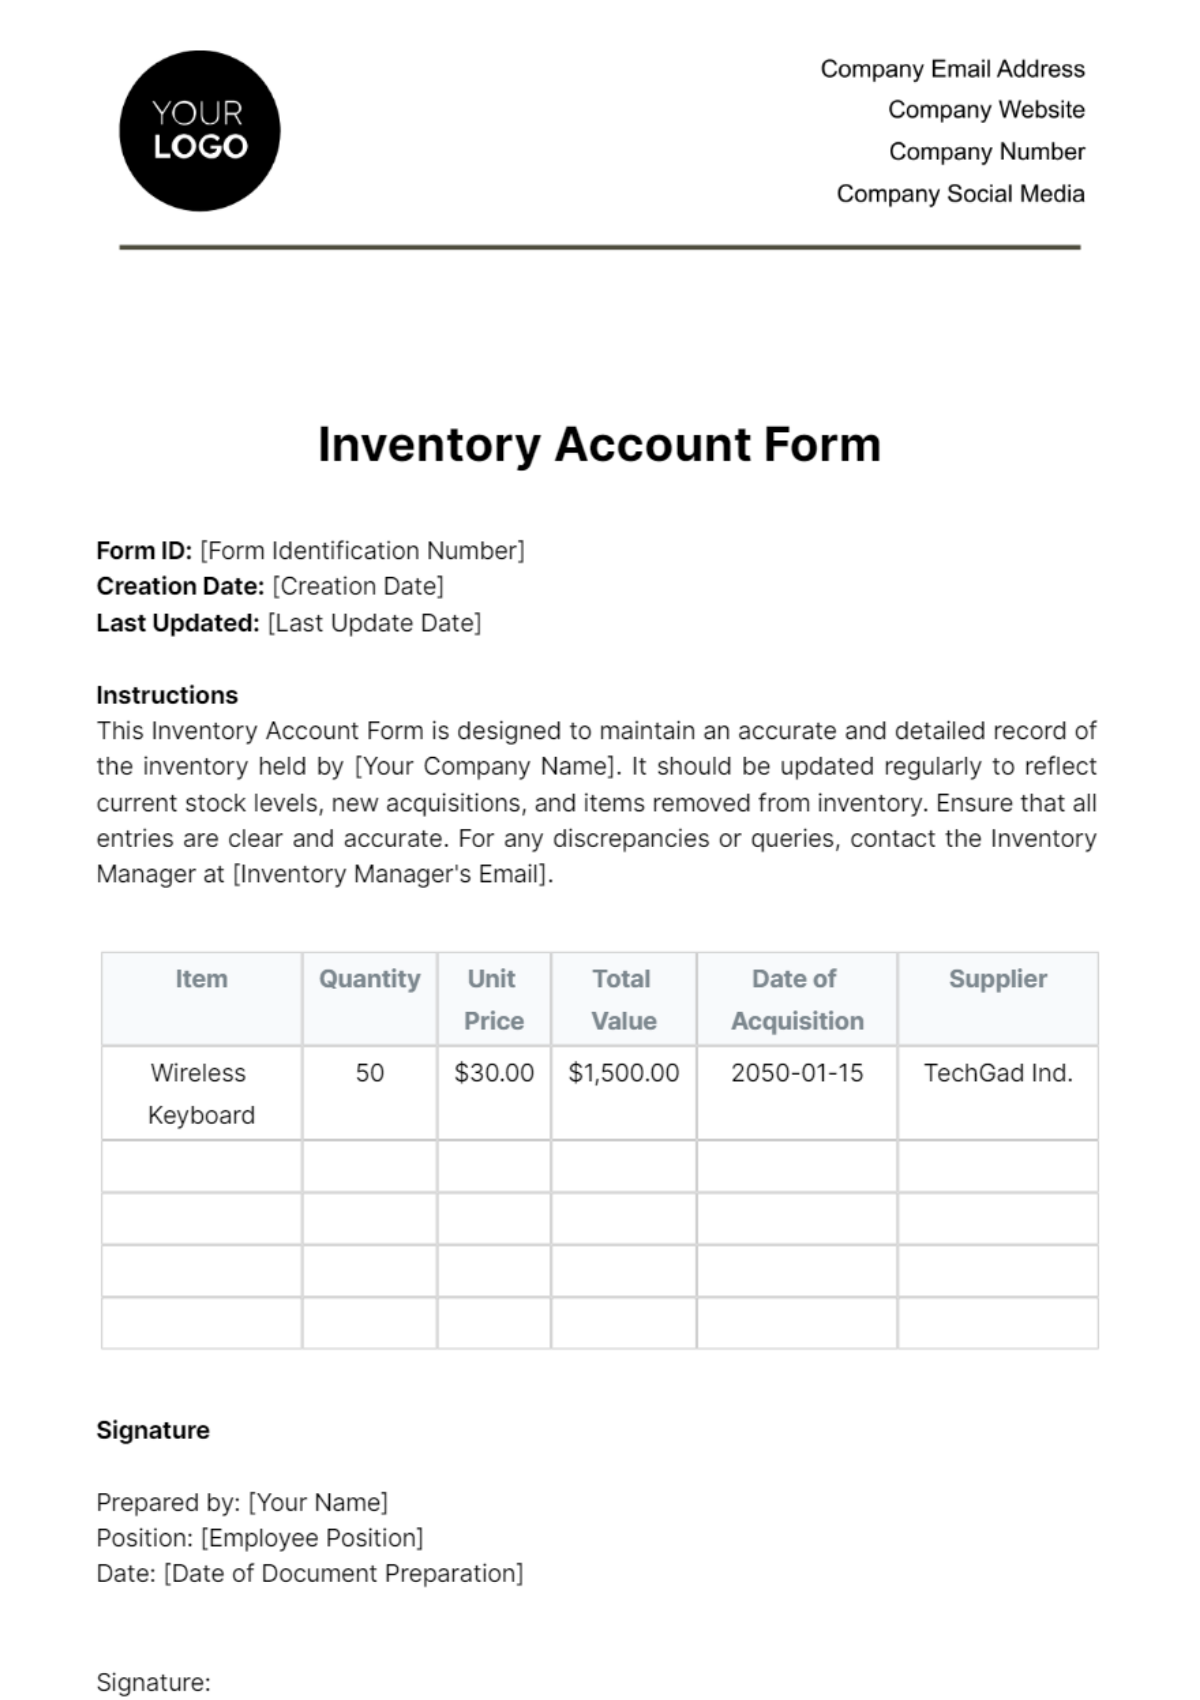 Free Inventory Account Form Template